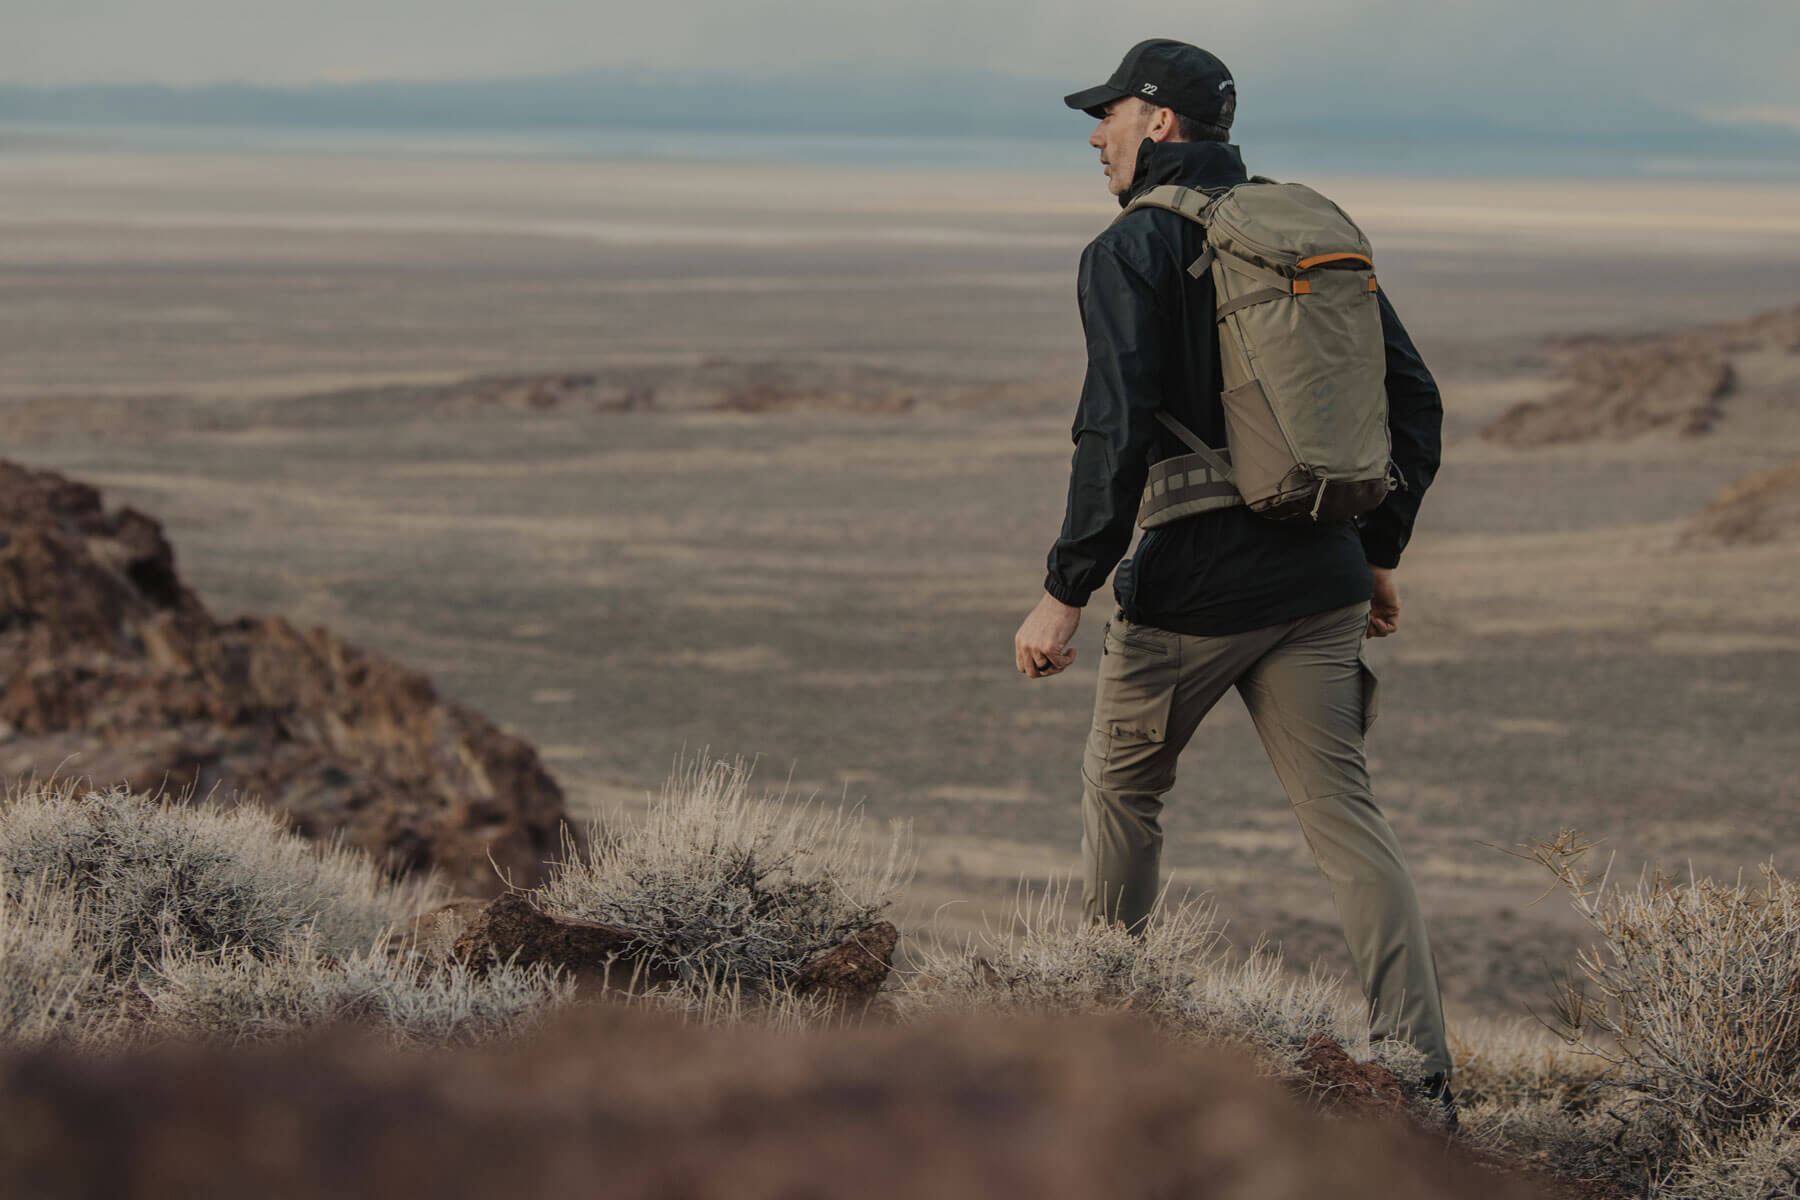 5.11 Tactical Announces New Clothing and Accessories